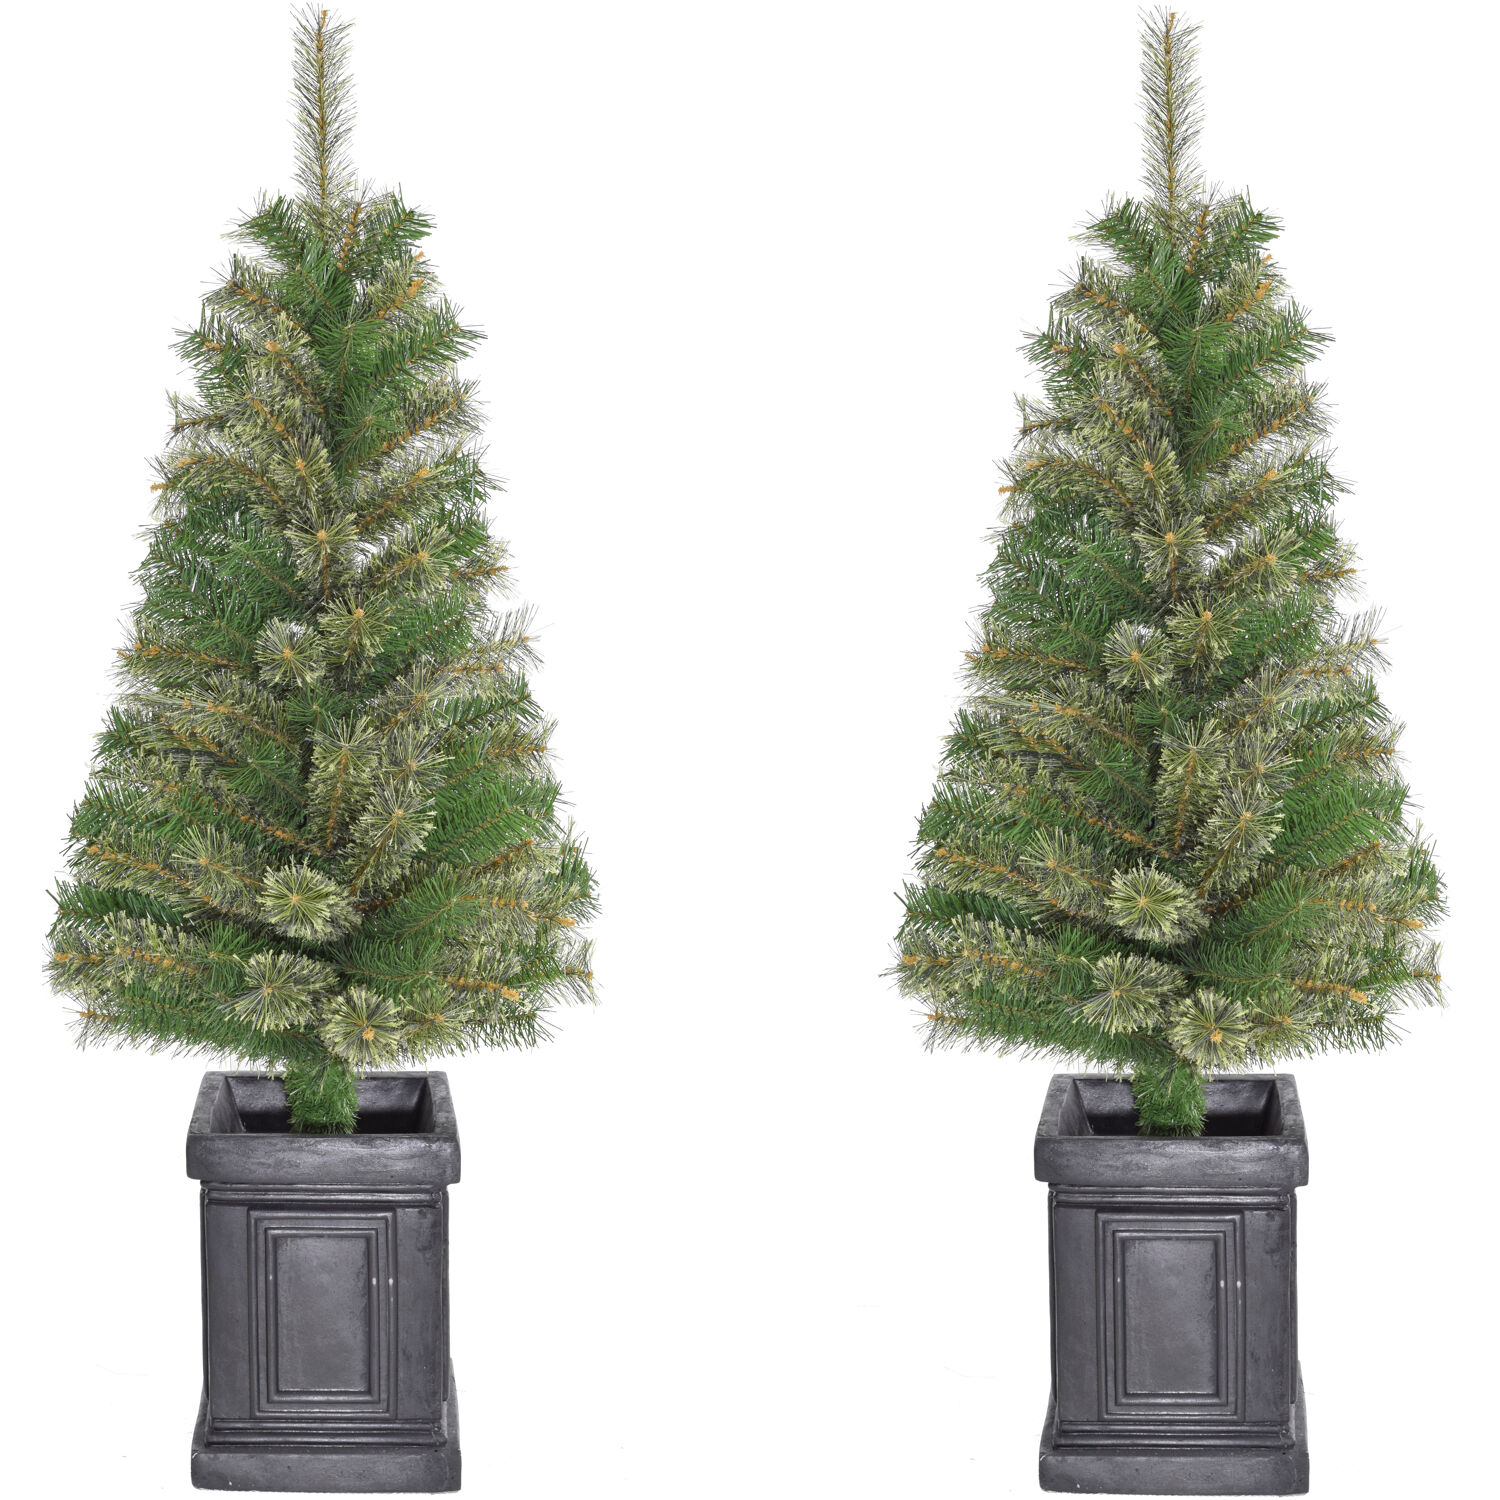 4-Ft. Set of 2 Porch Accent Tree in Black Pot, No Lights - image 1 of 5